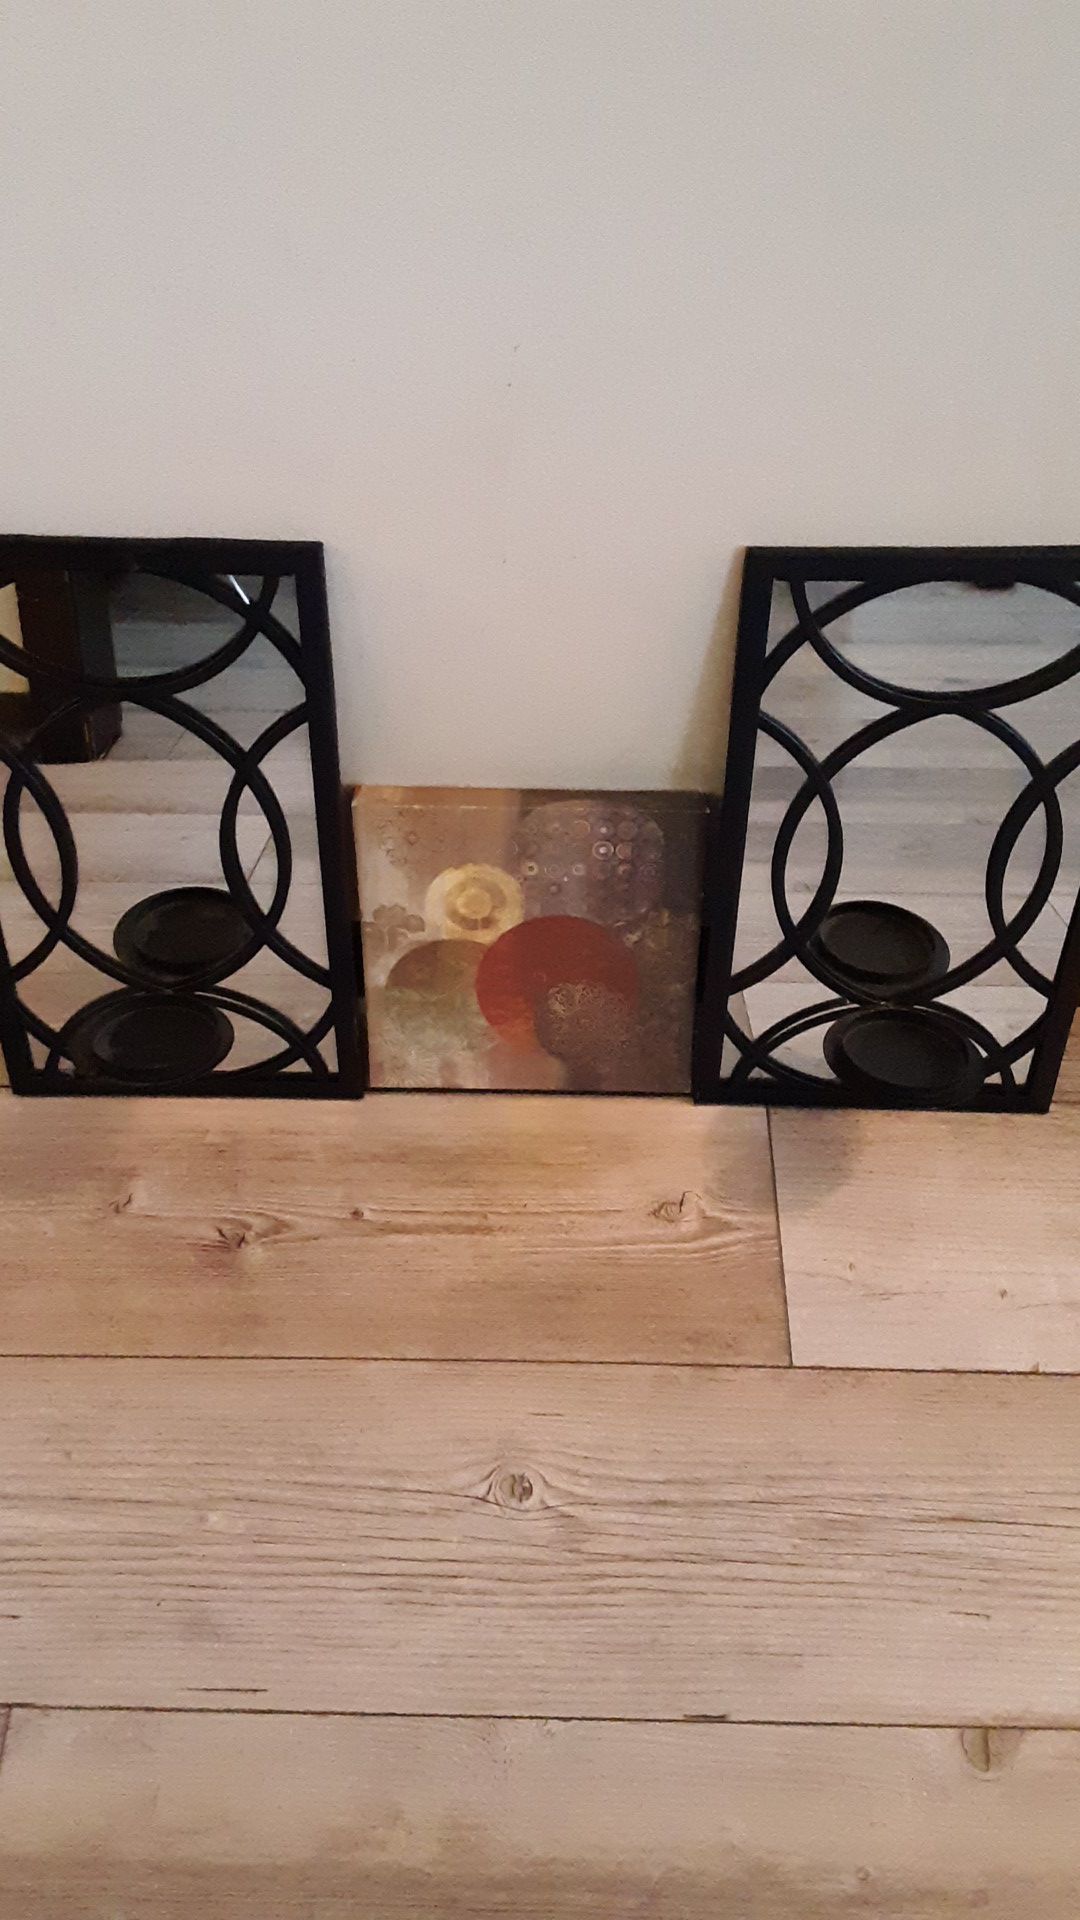 Candle holder and wall art